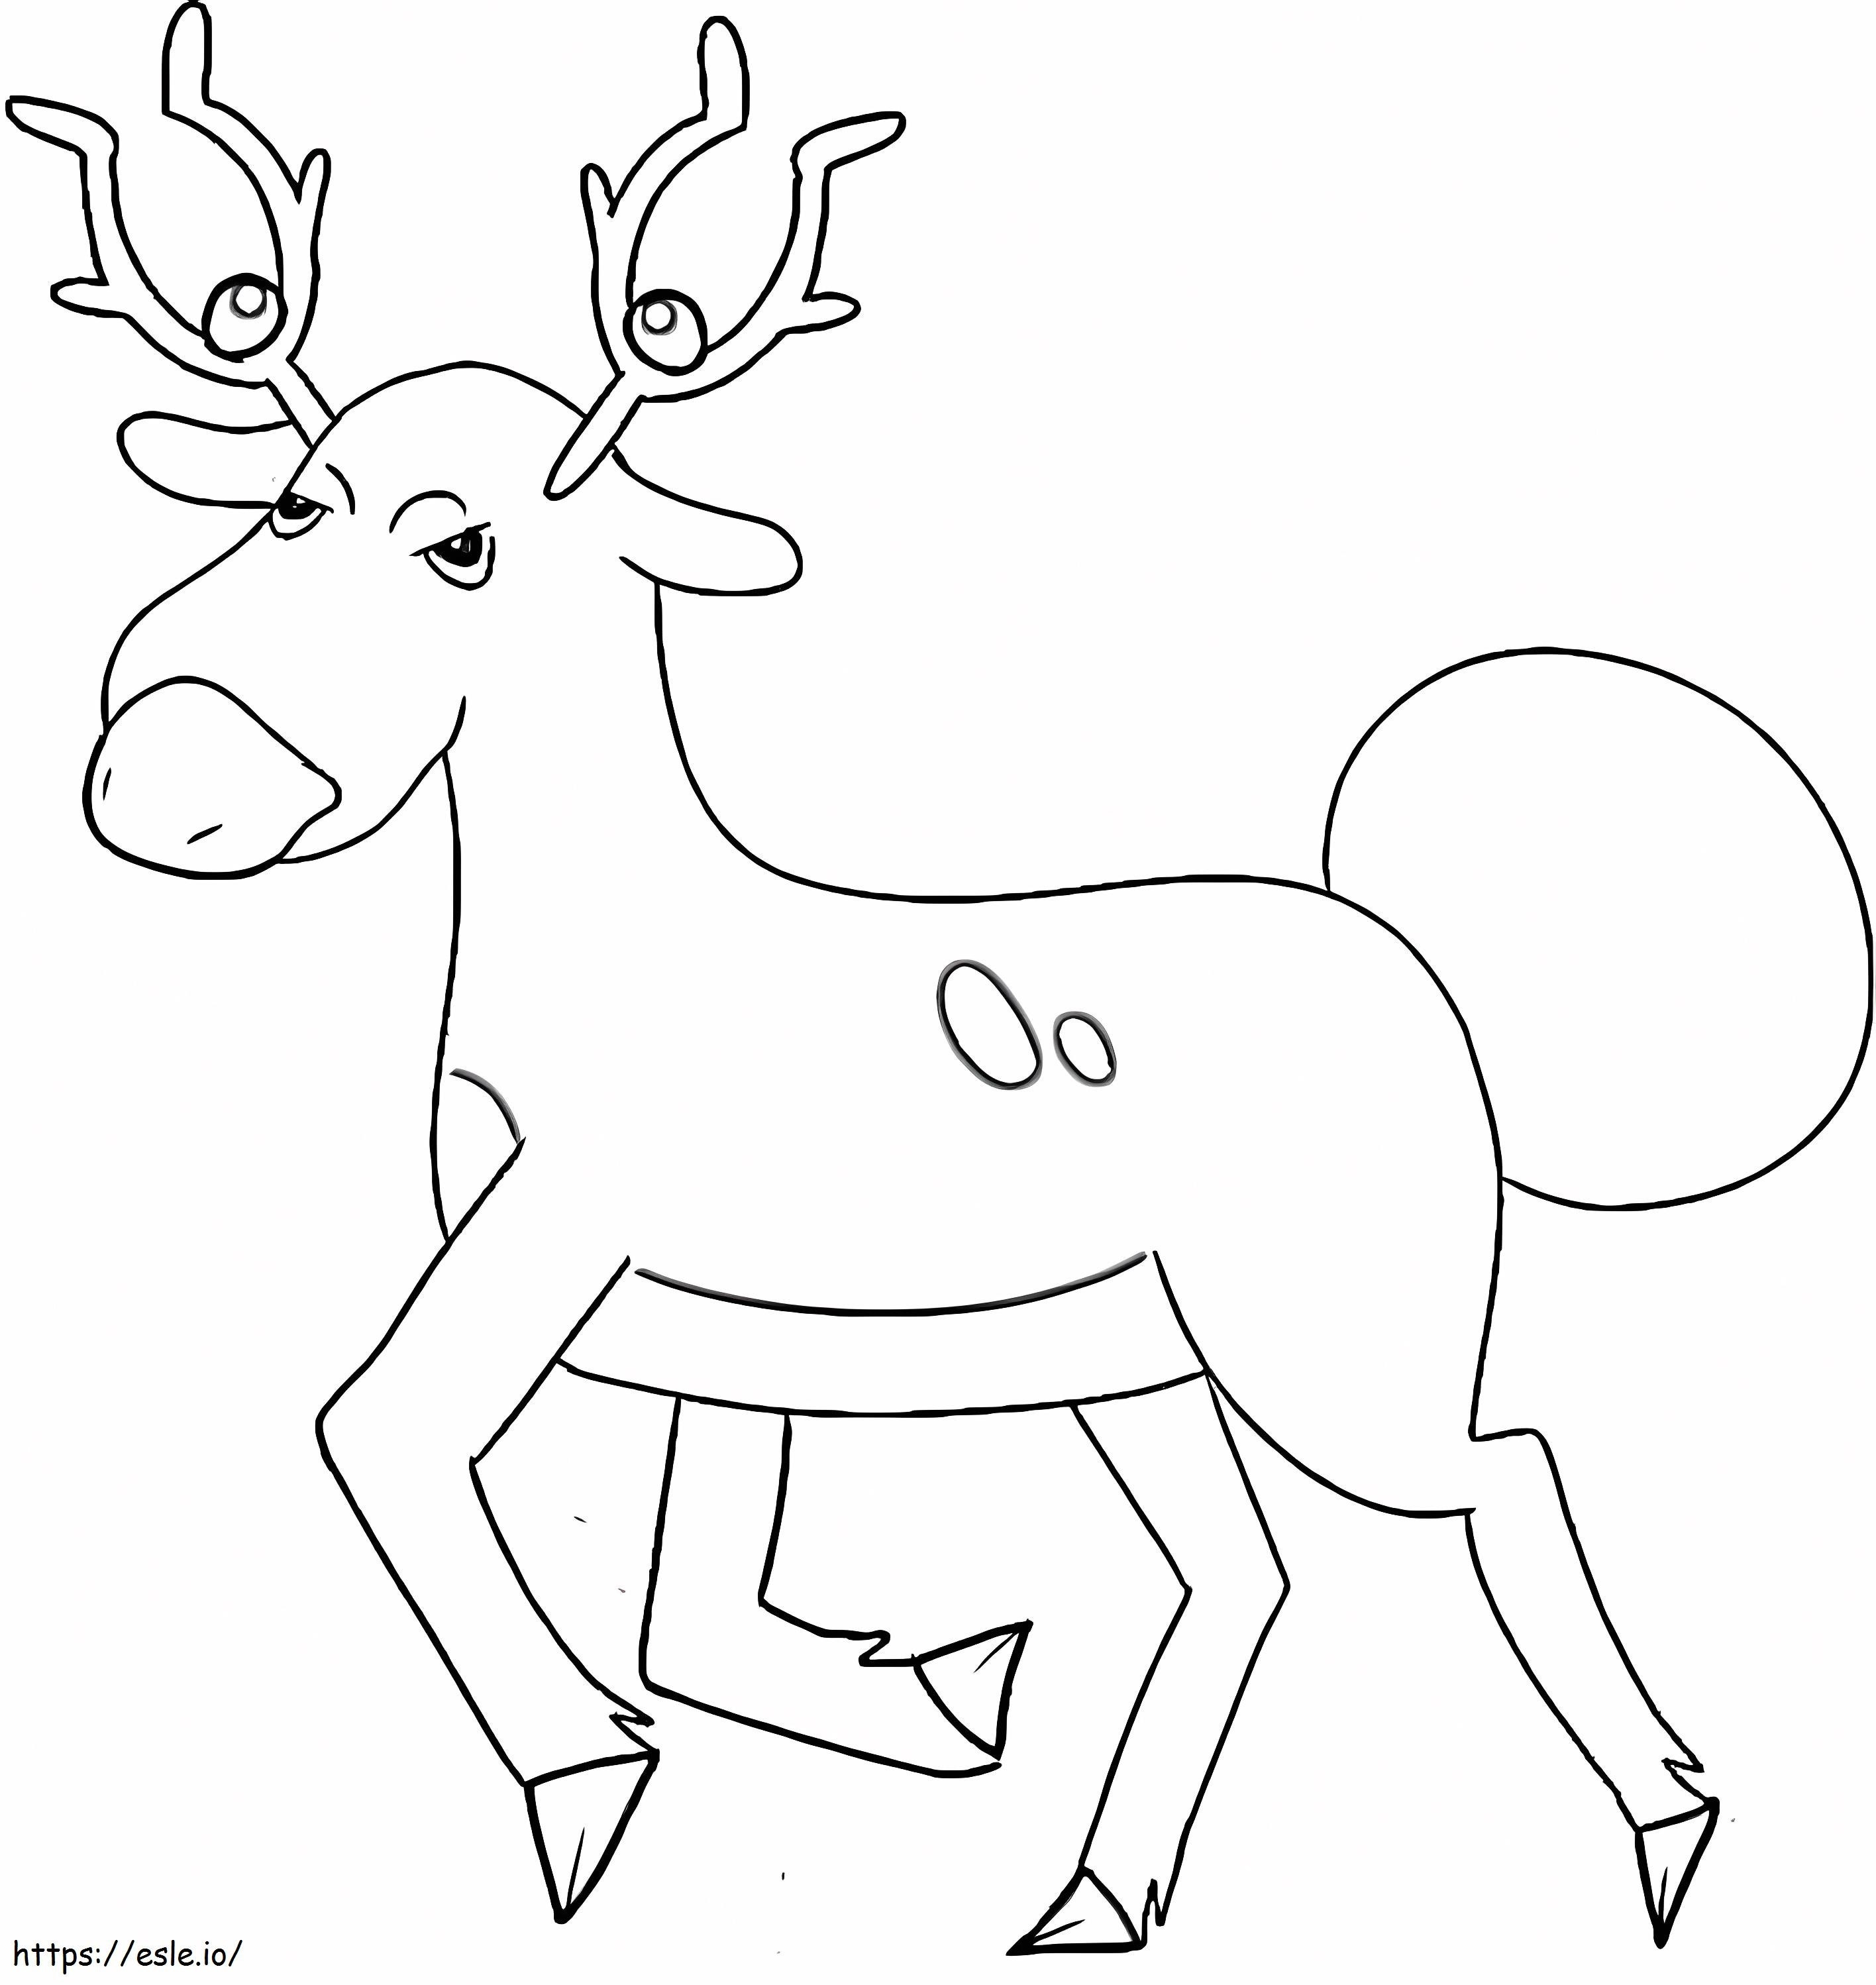 Funny Stantler Pokemon coloring page